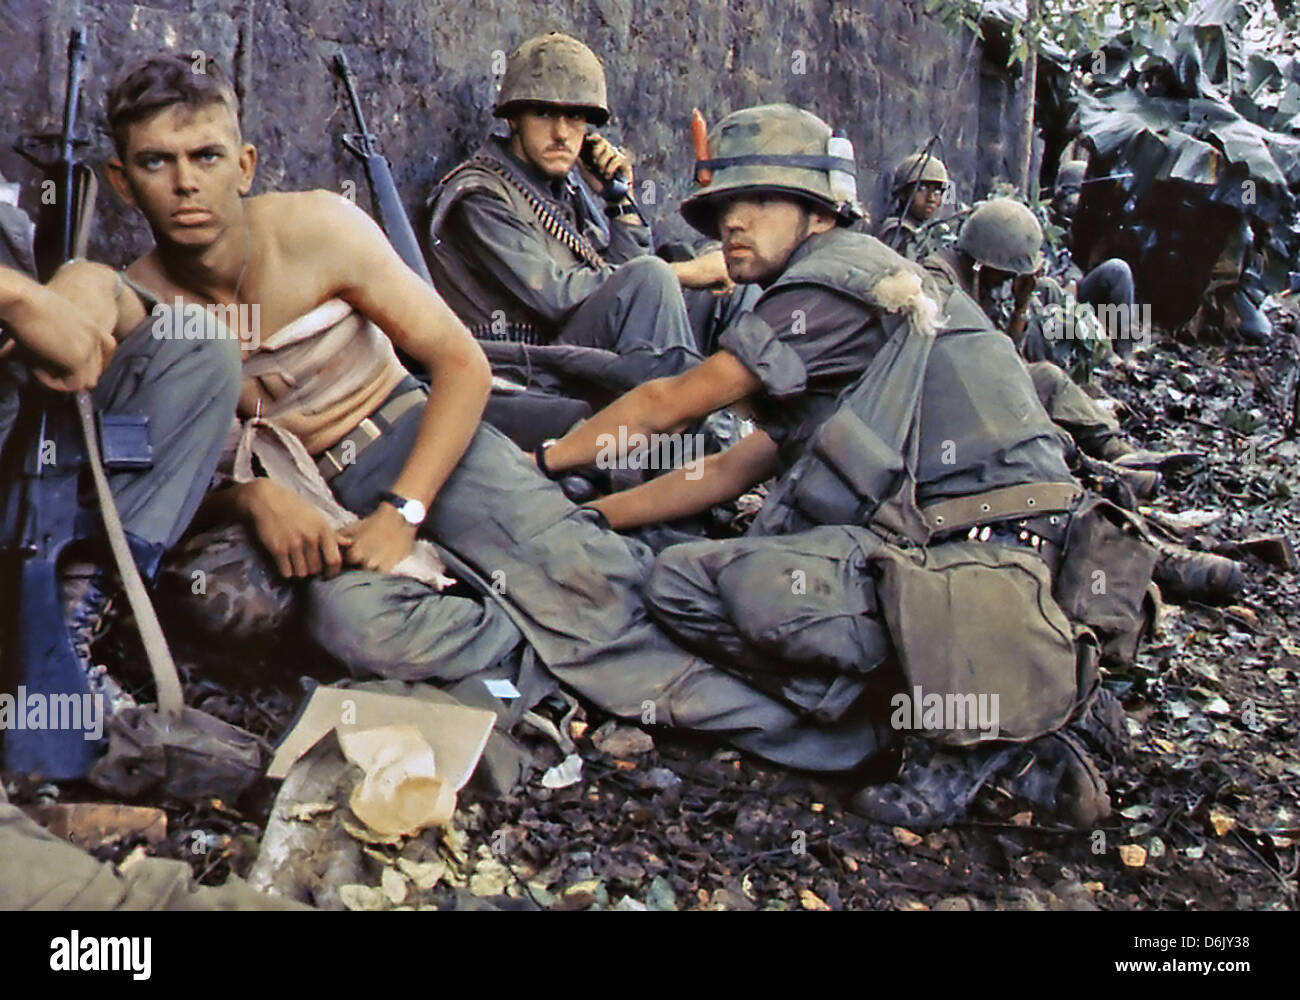 US Marine D. R. Howe treats the wounds of Private First Class D. A. Crum during the Tet Offensive June 2, 1968 in Hue City, Vietnam. Stock Photo